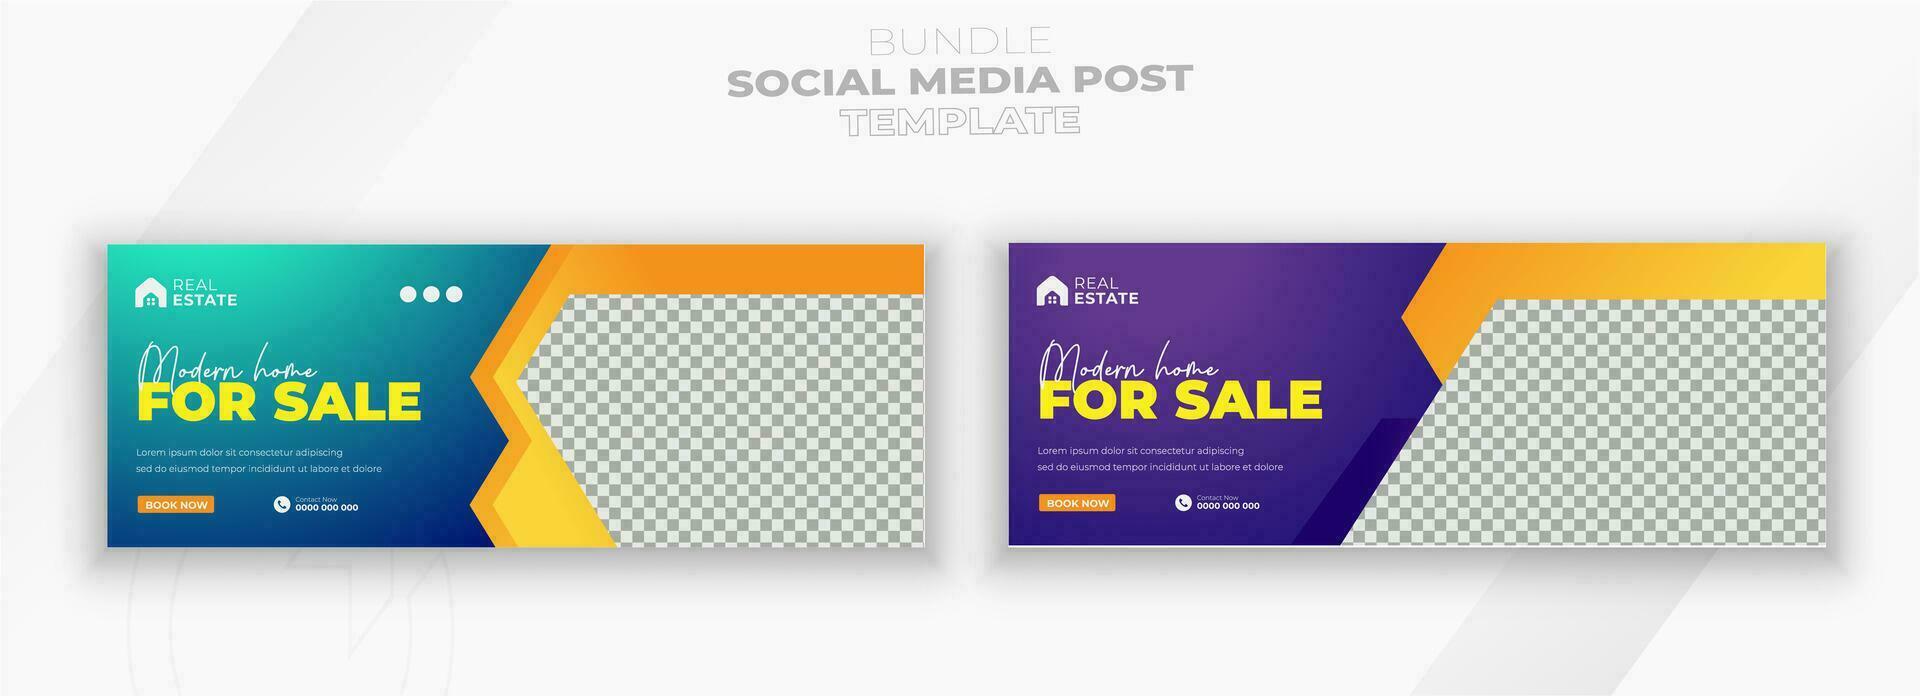 Real estate Luxury home property and 2 color gradient clean background or digital Construction social media post bundle design template vector